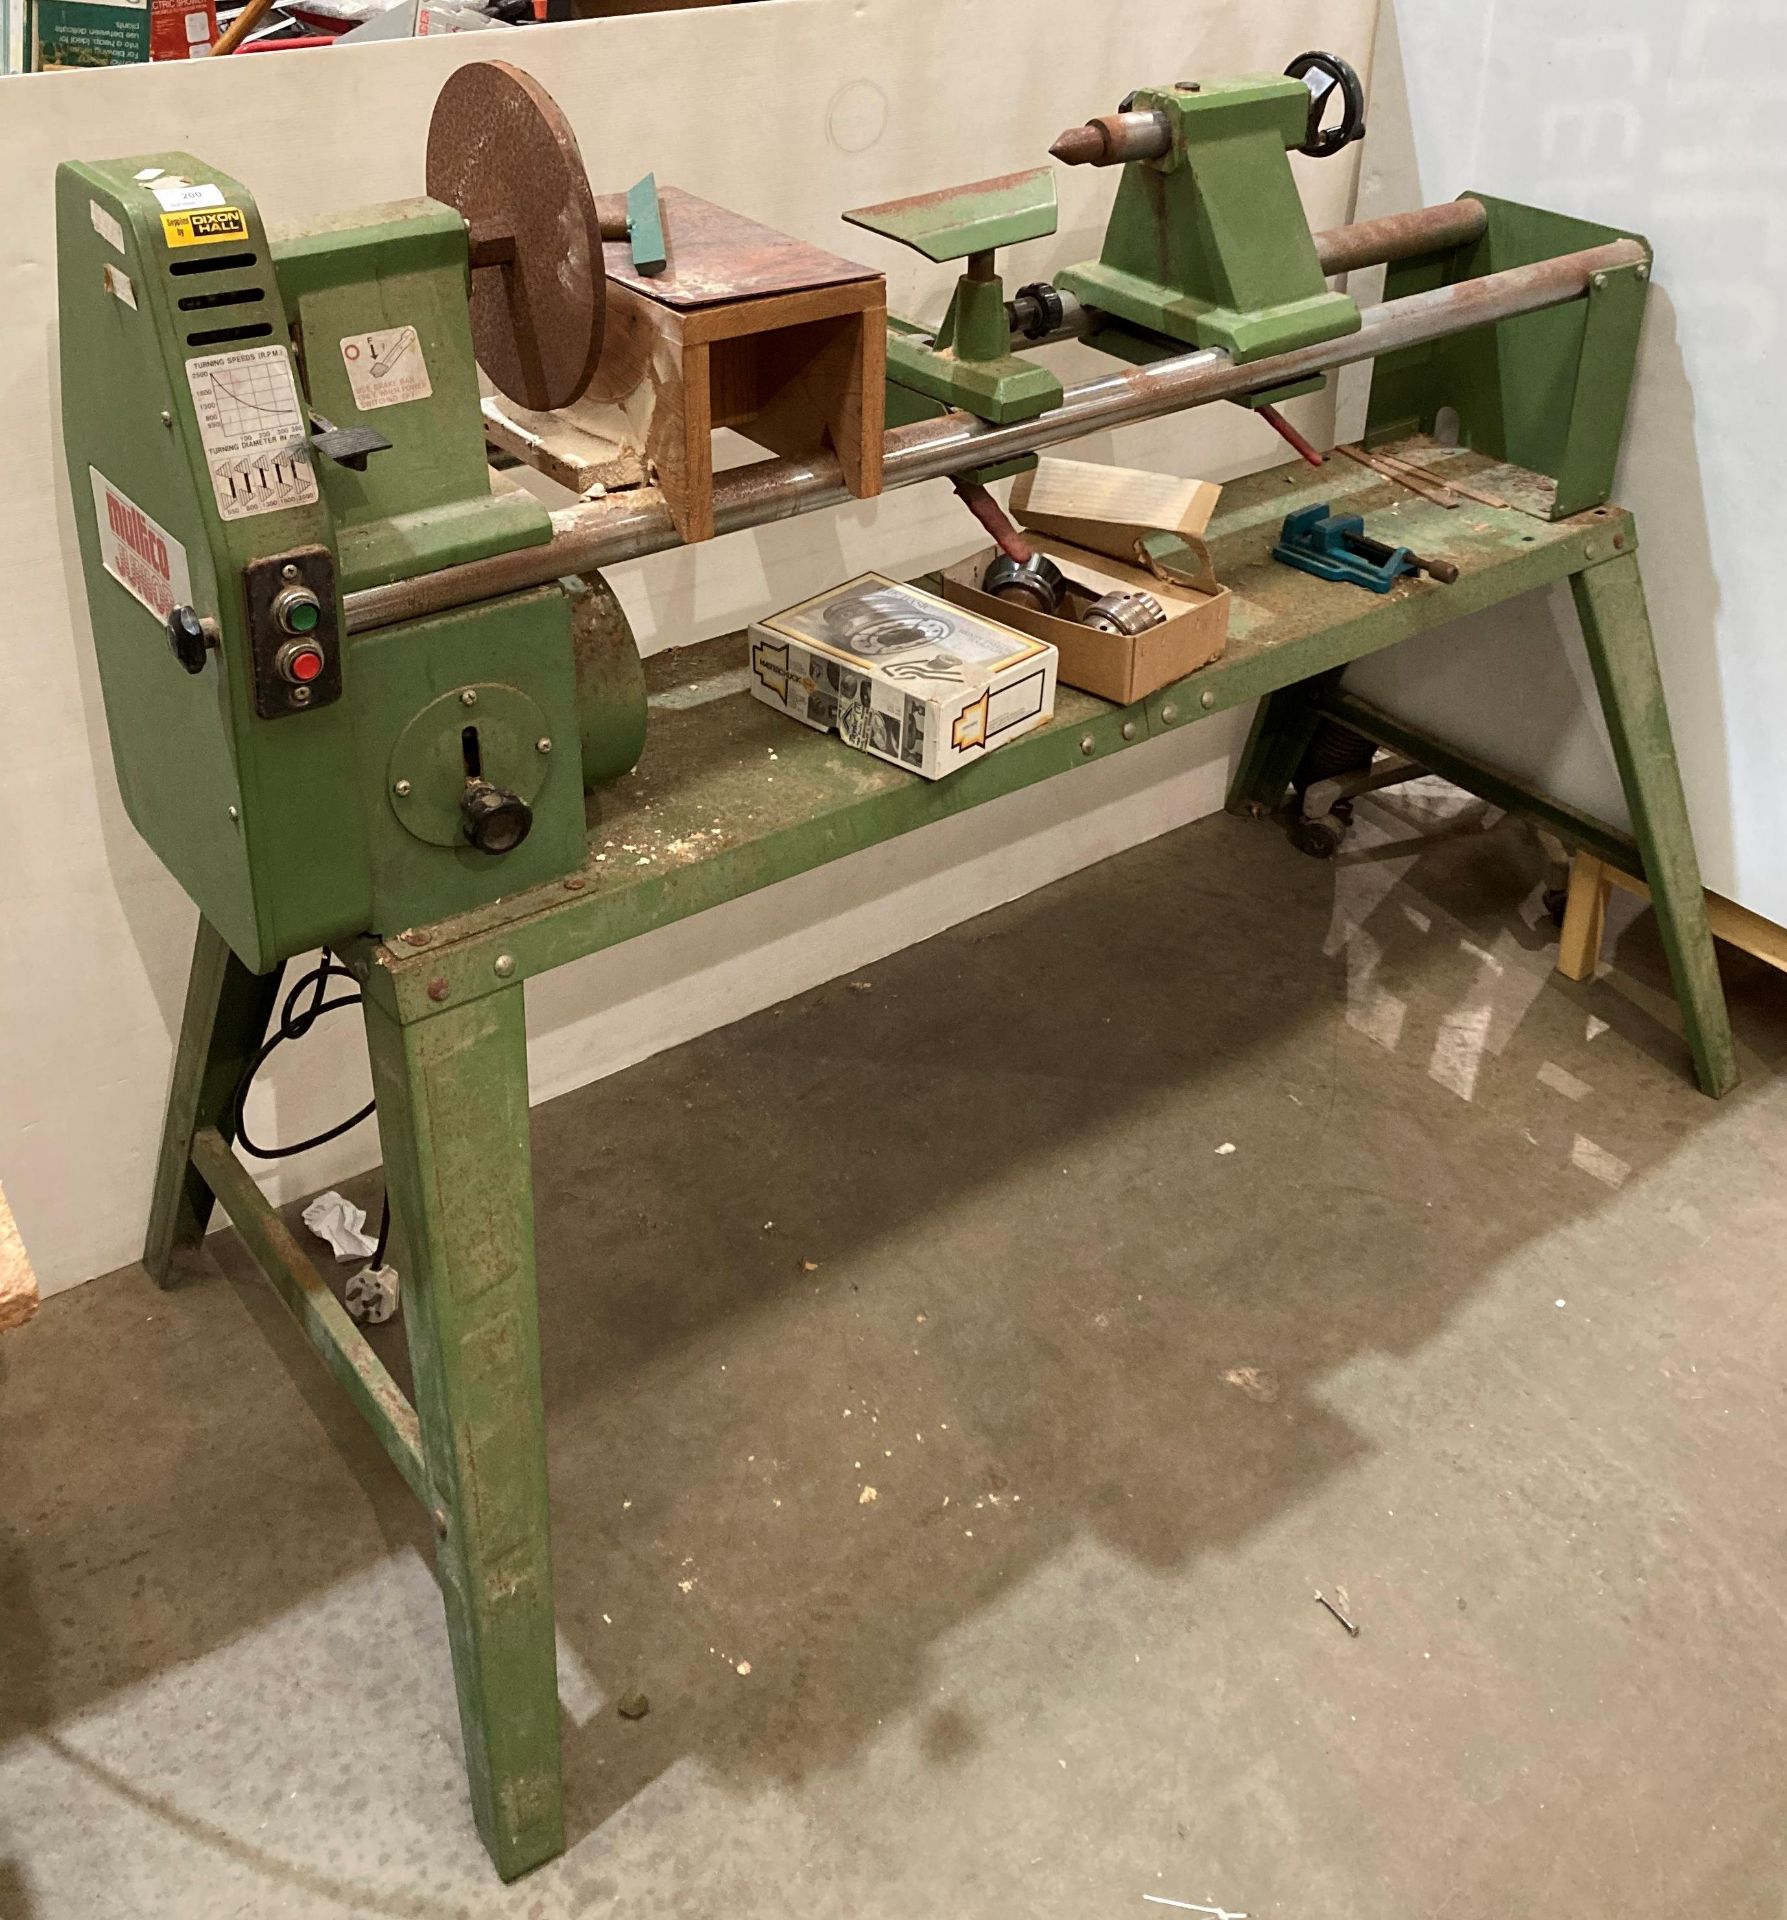 Tekny Multico Junior wood turning lathe with sanding disc attachment and a Henry Taylor Masterchuck